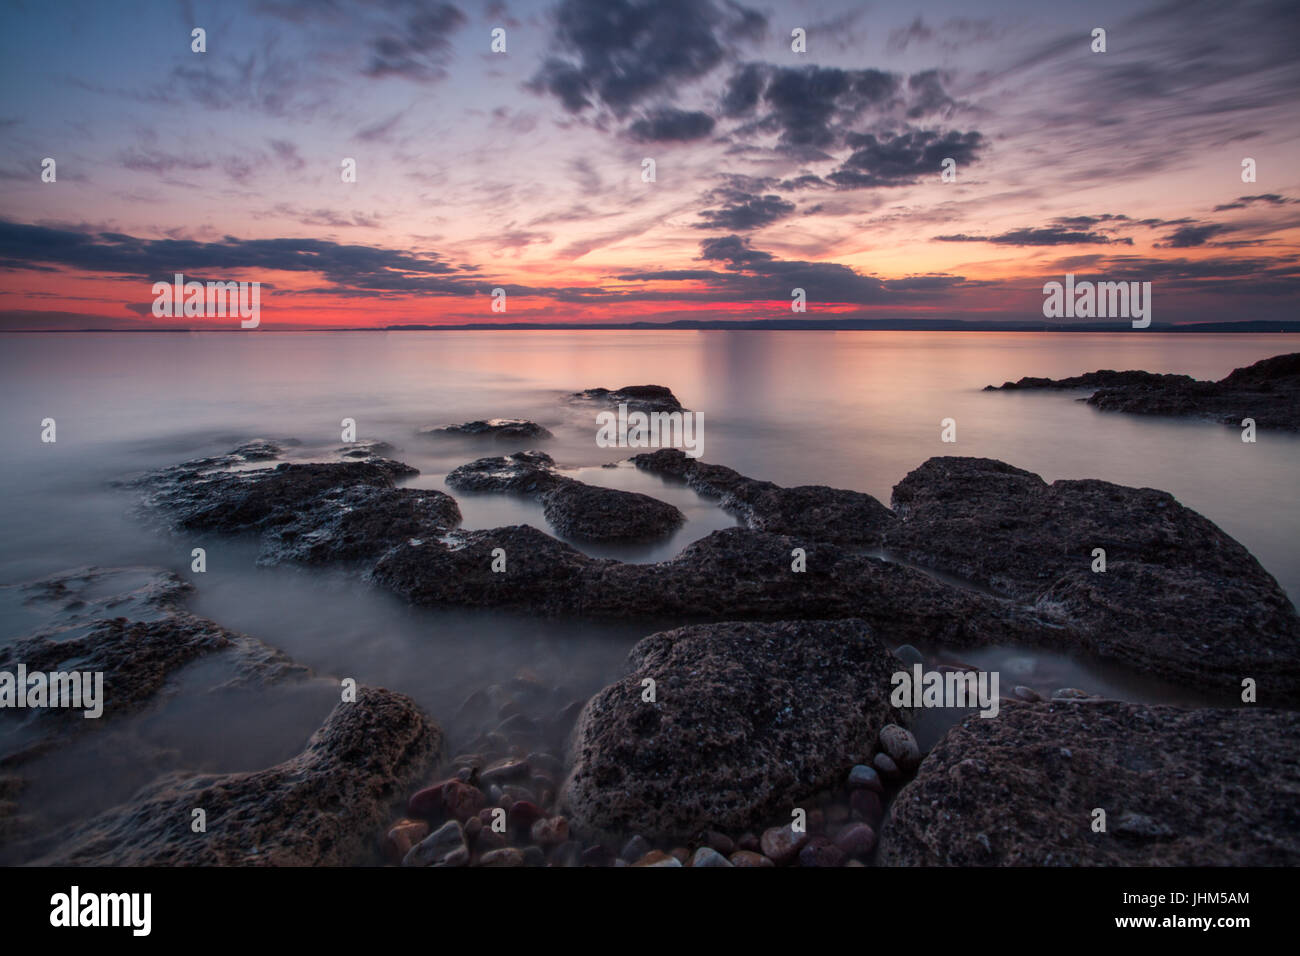 Tranquil sunset seascape Stock Photo